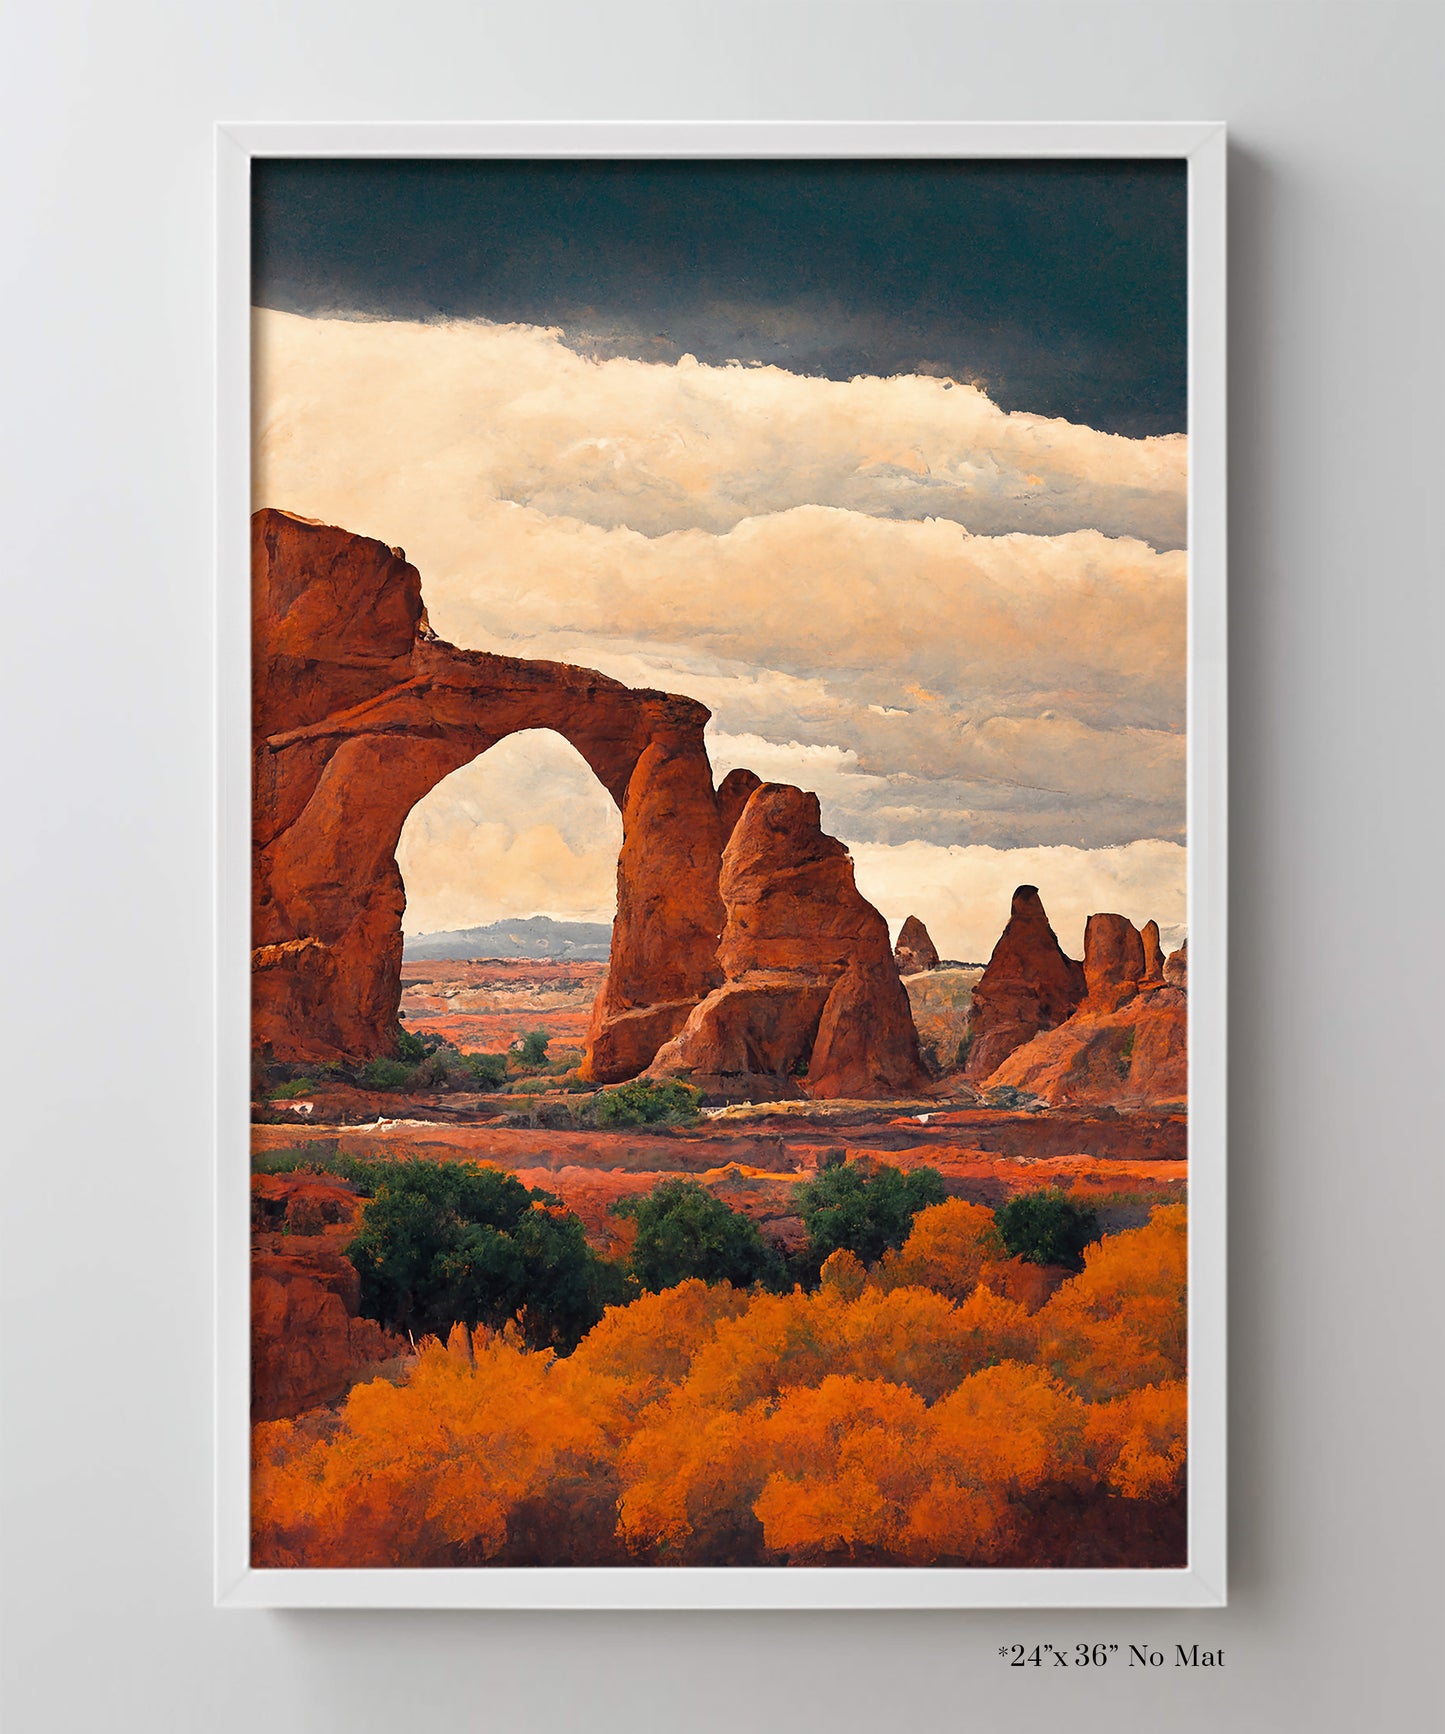 Wild West Landscapes #5 of 6 - Arches 1